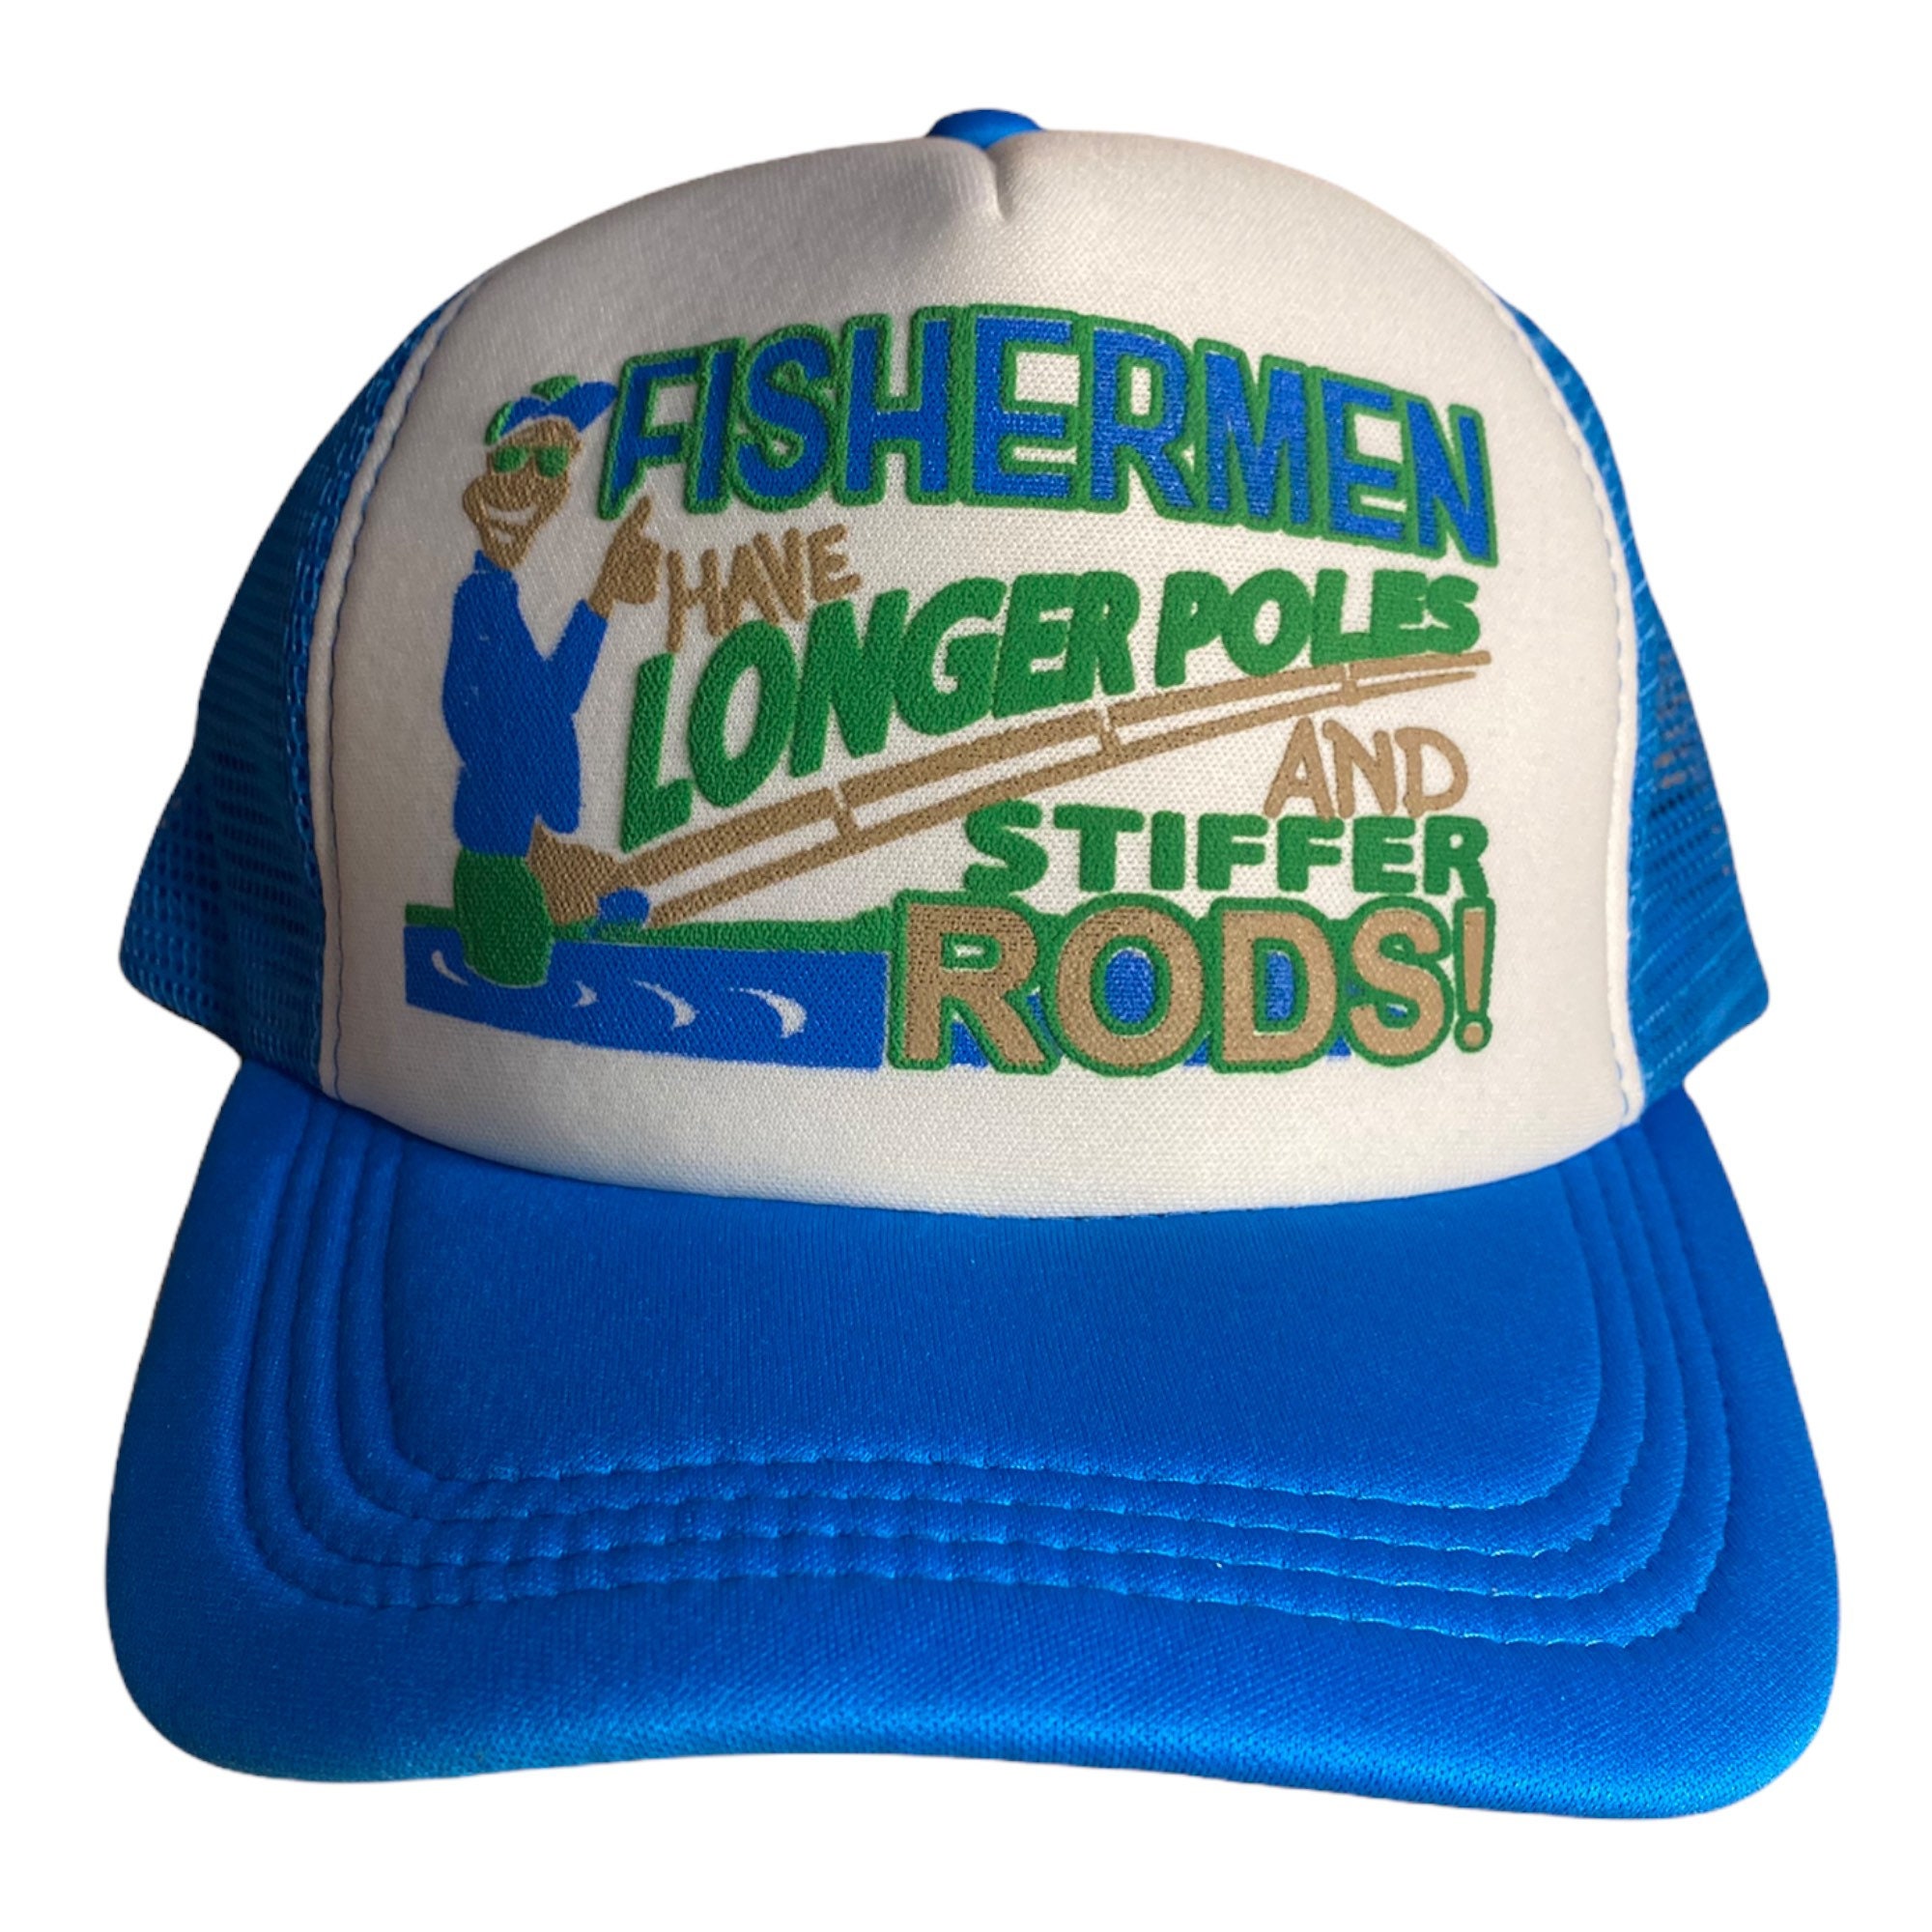 Can't Work Today My Arm is in A Cast Hat Funny Fishing Rod Joke Cap Crazy  Dog Novelty Hats for Fishers Soft Comfortable Funny Cap Blue - CAST  Standard : : Clothing